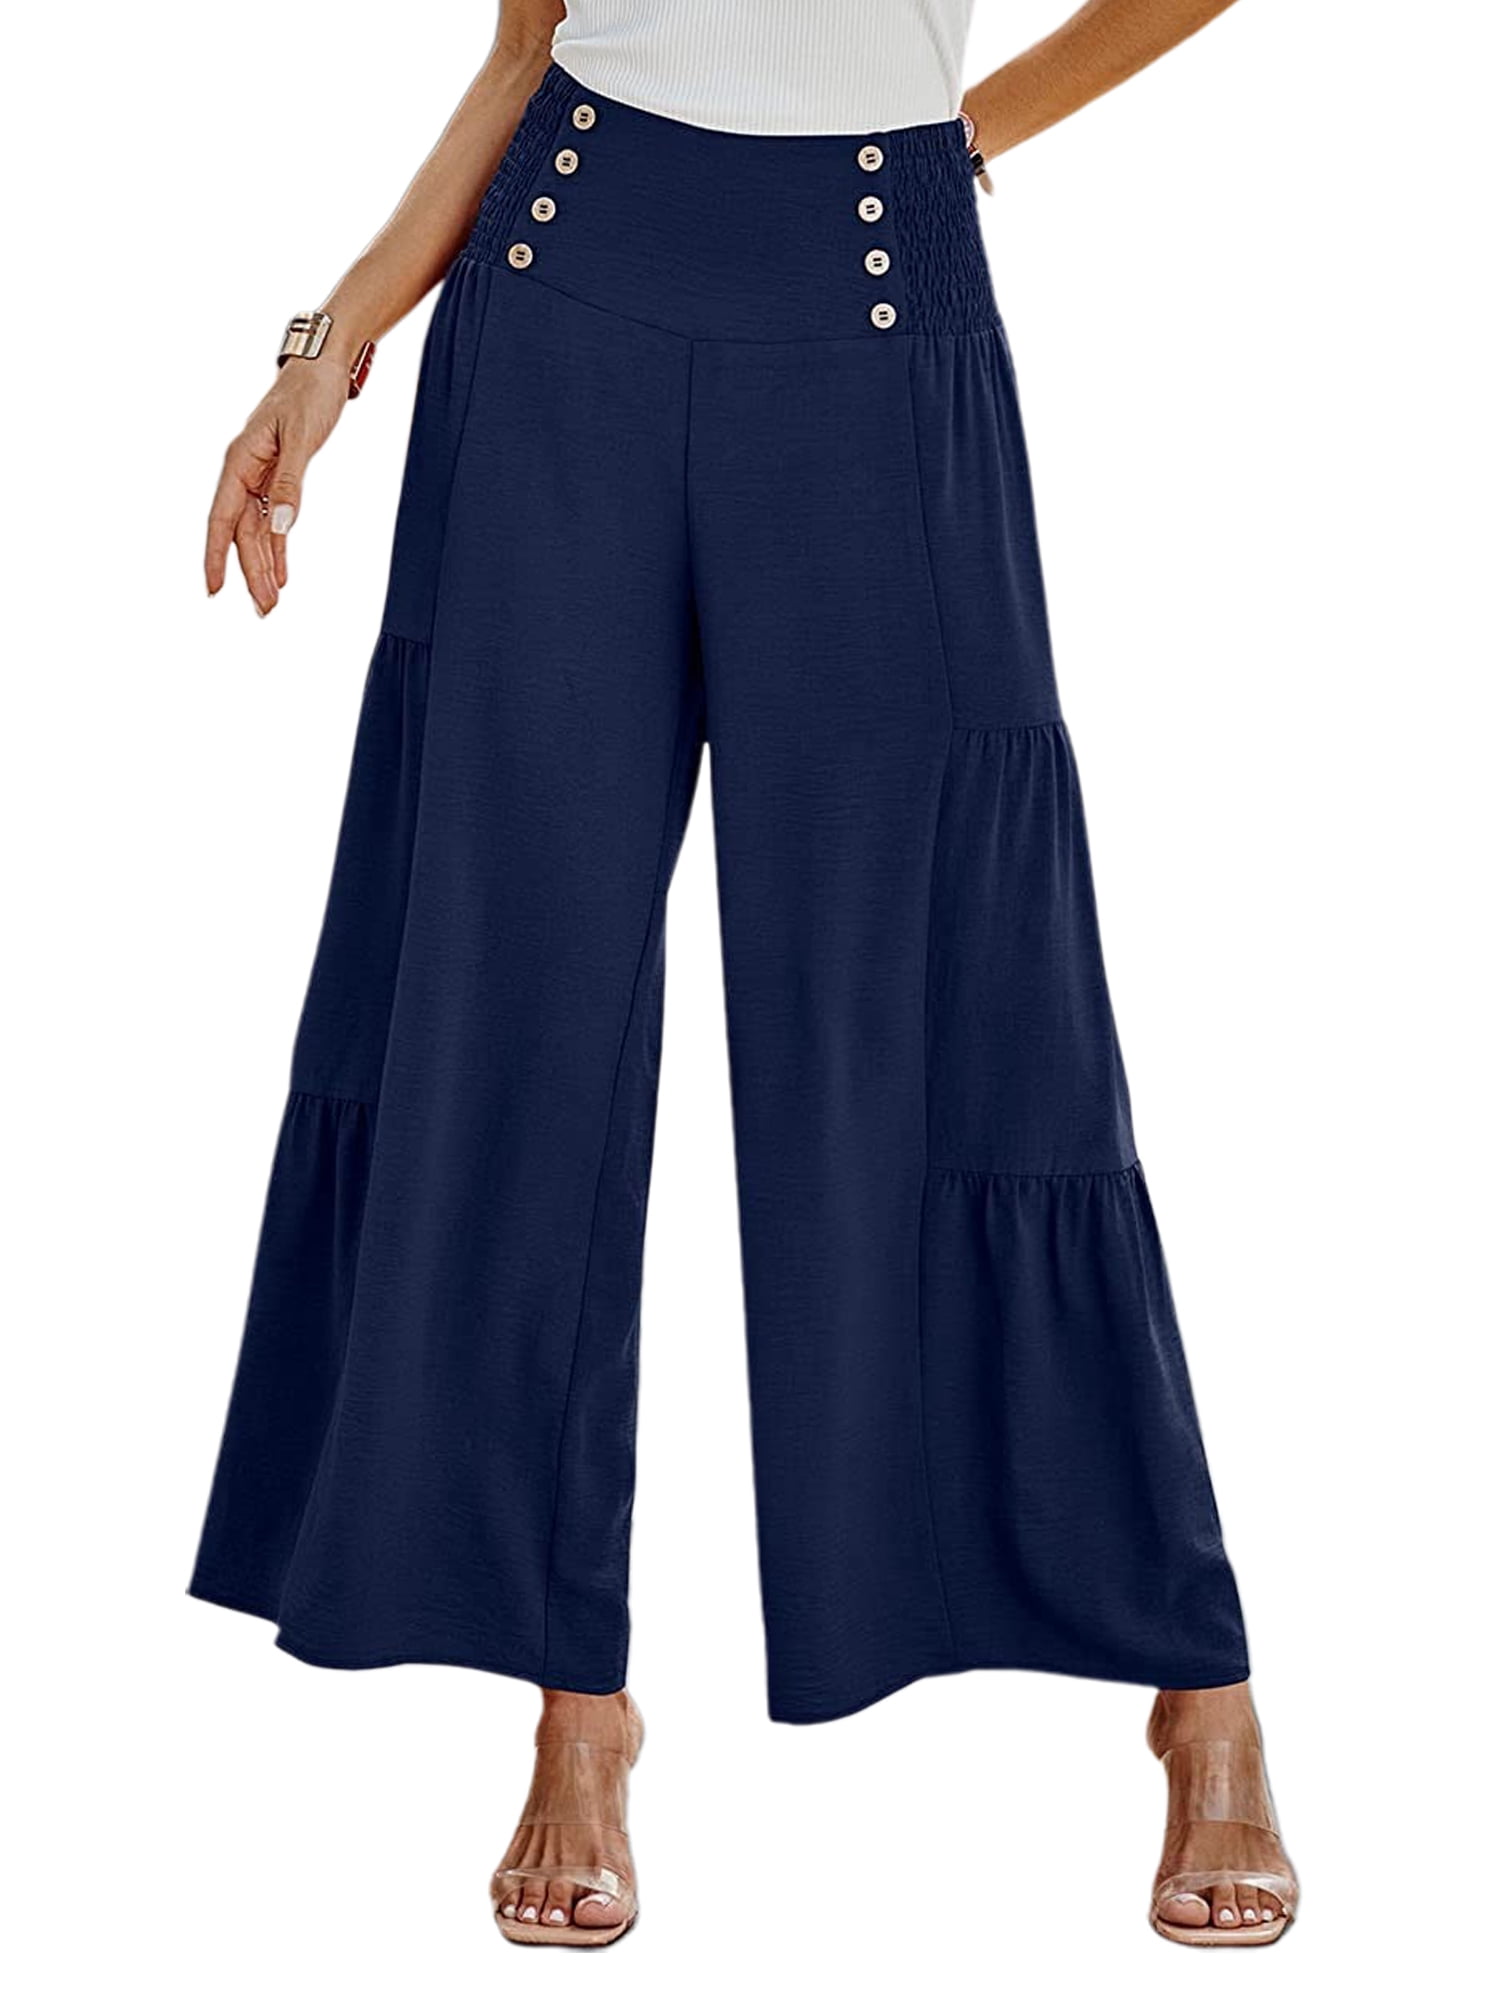 HOW TO WEAR WIDE LEG PANTS - Inspiring Wit